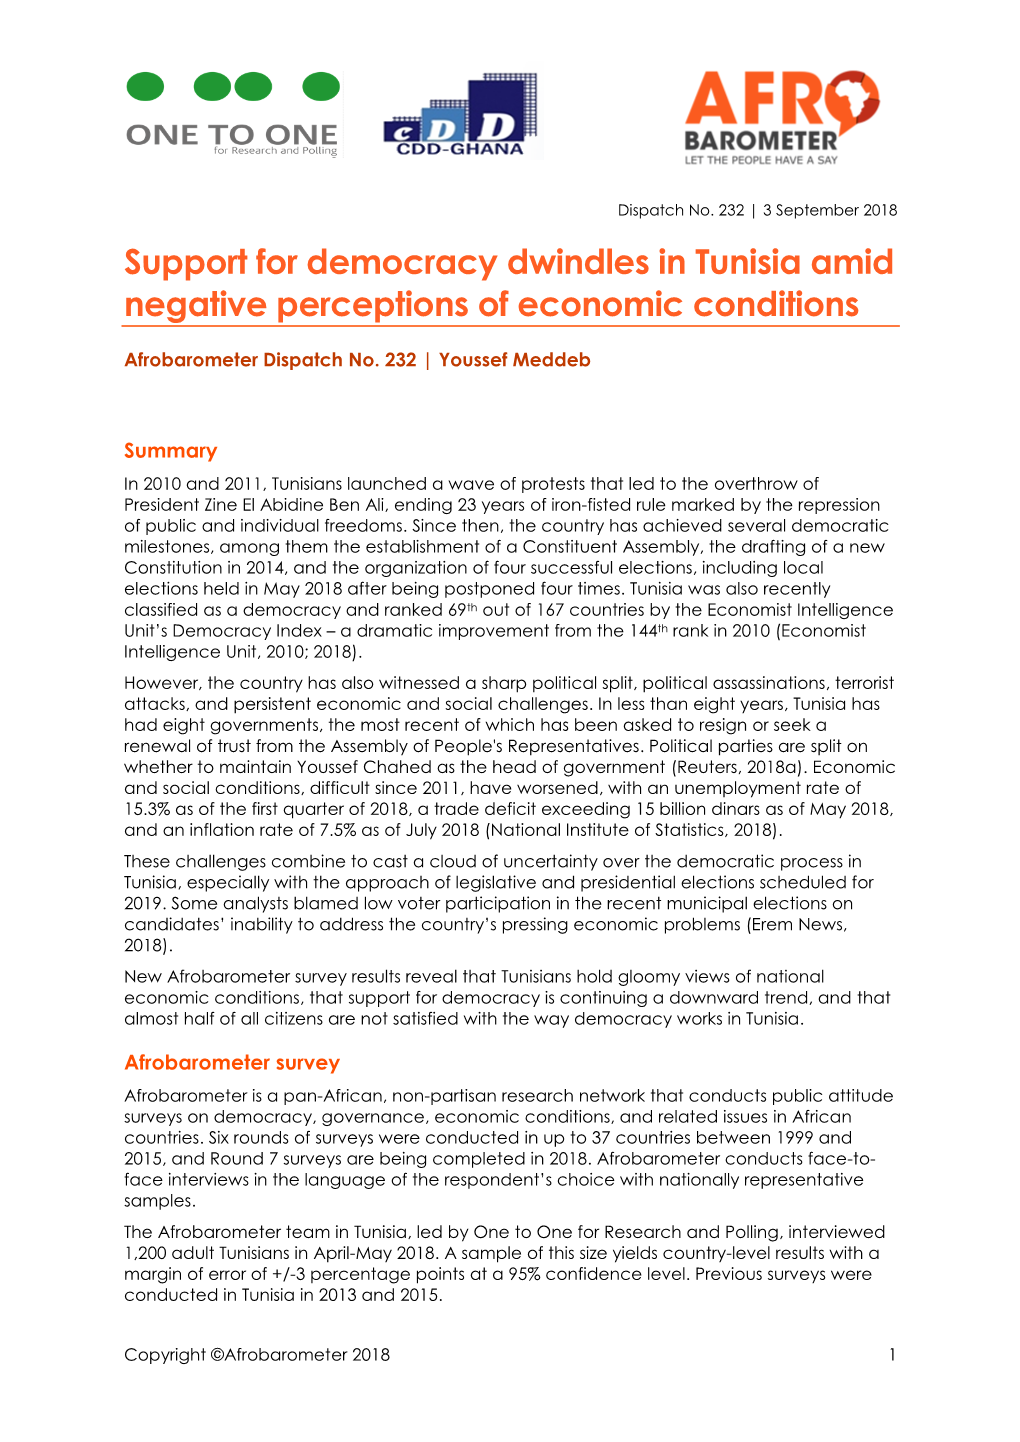 Support for Democracy Dwindles in Tunisia Amid Negative Perceptions of Economic Conditions